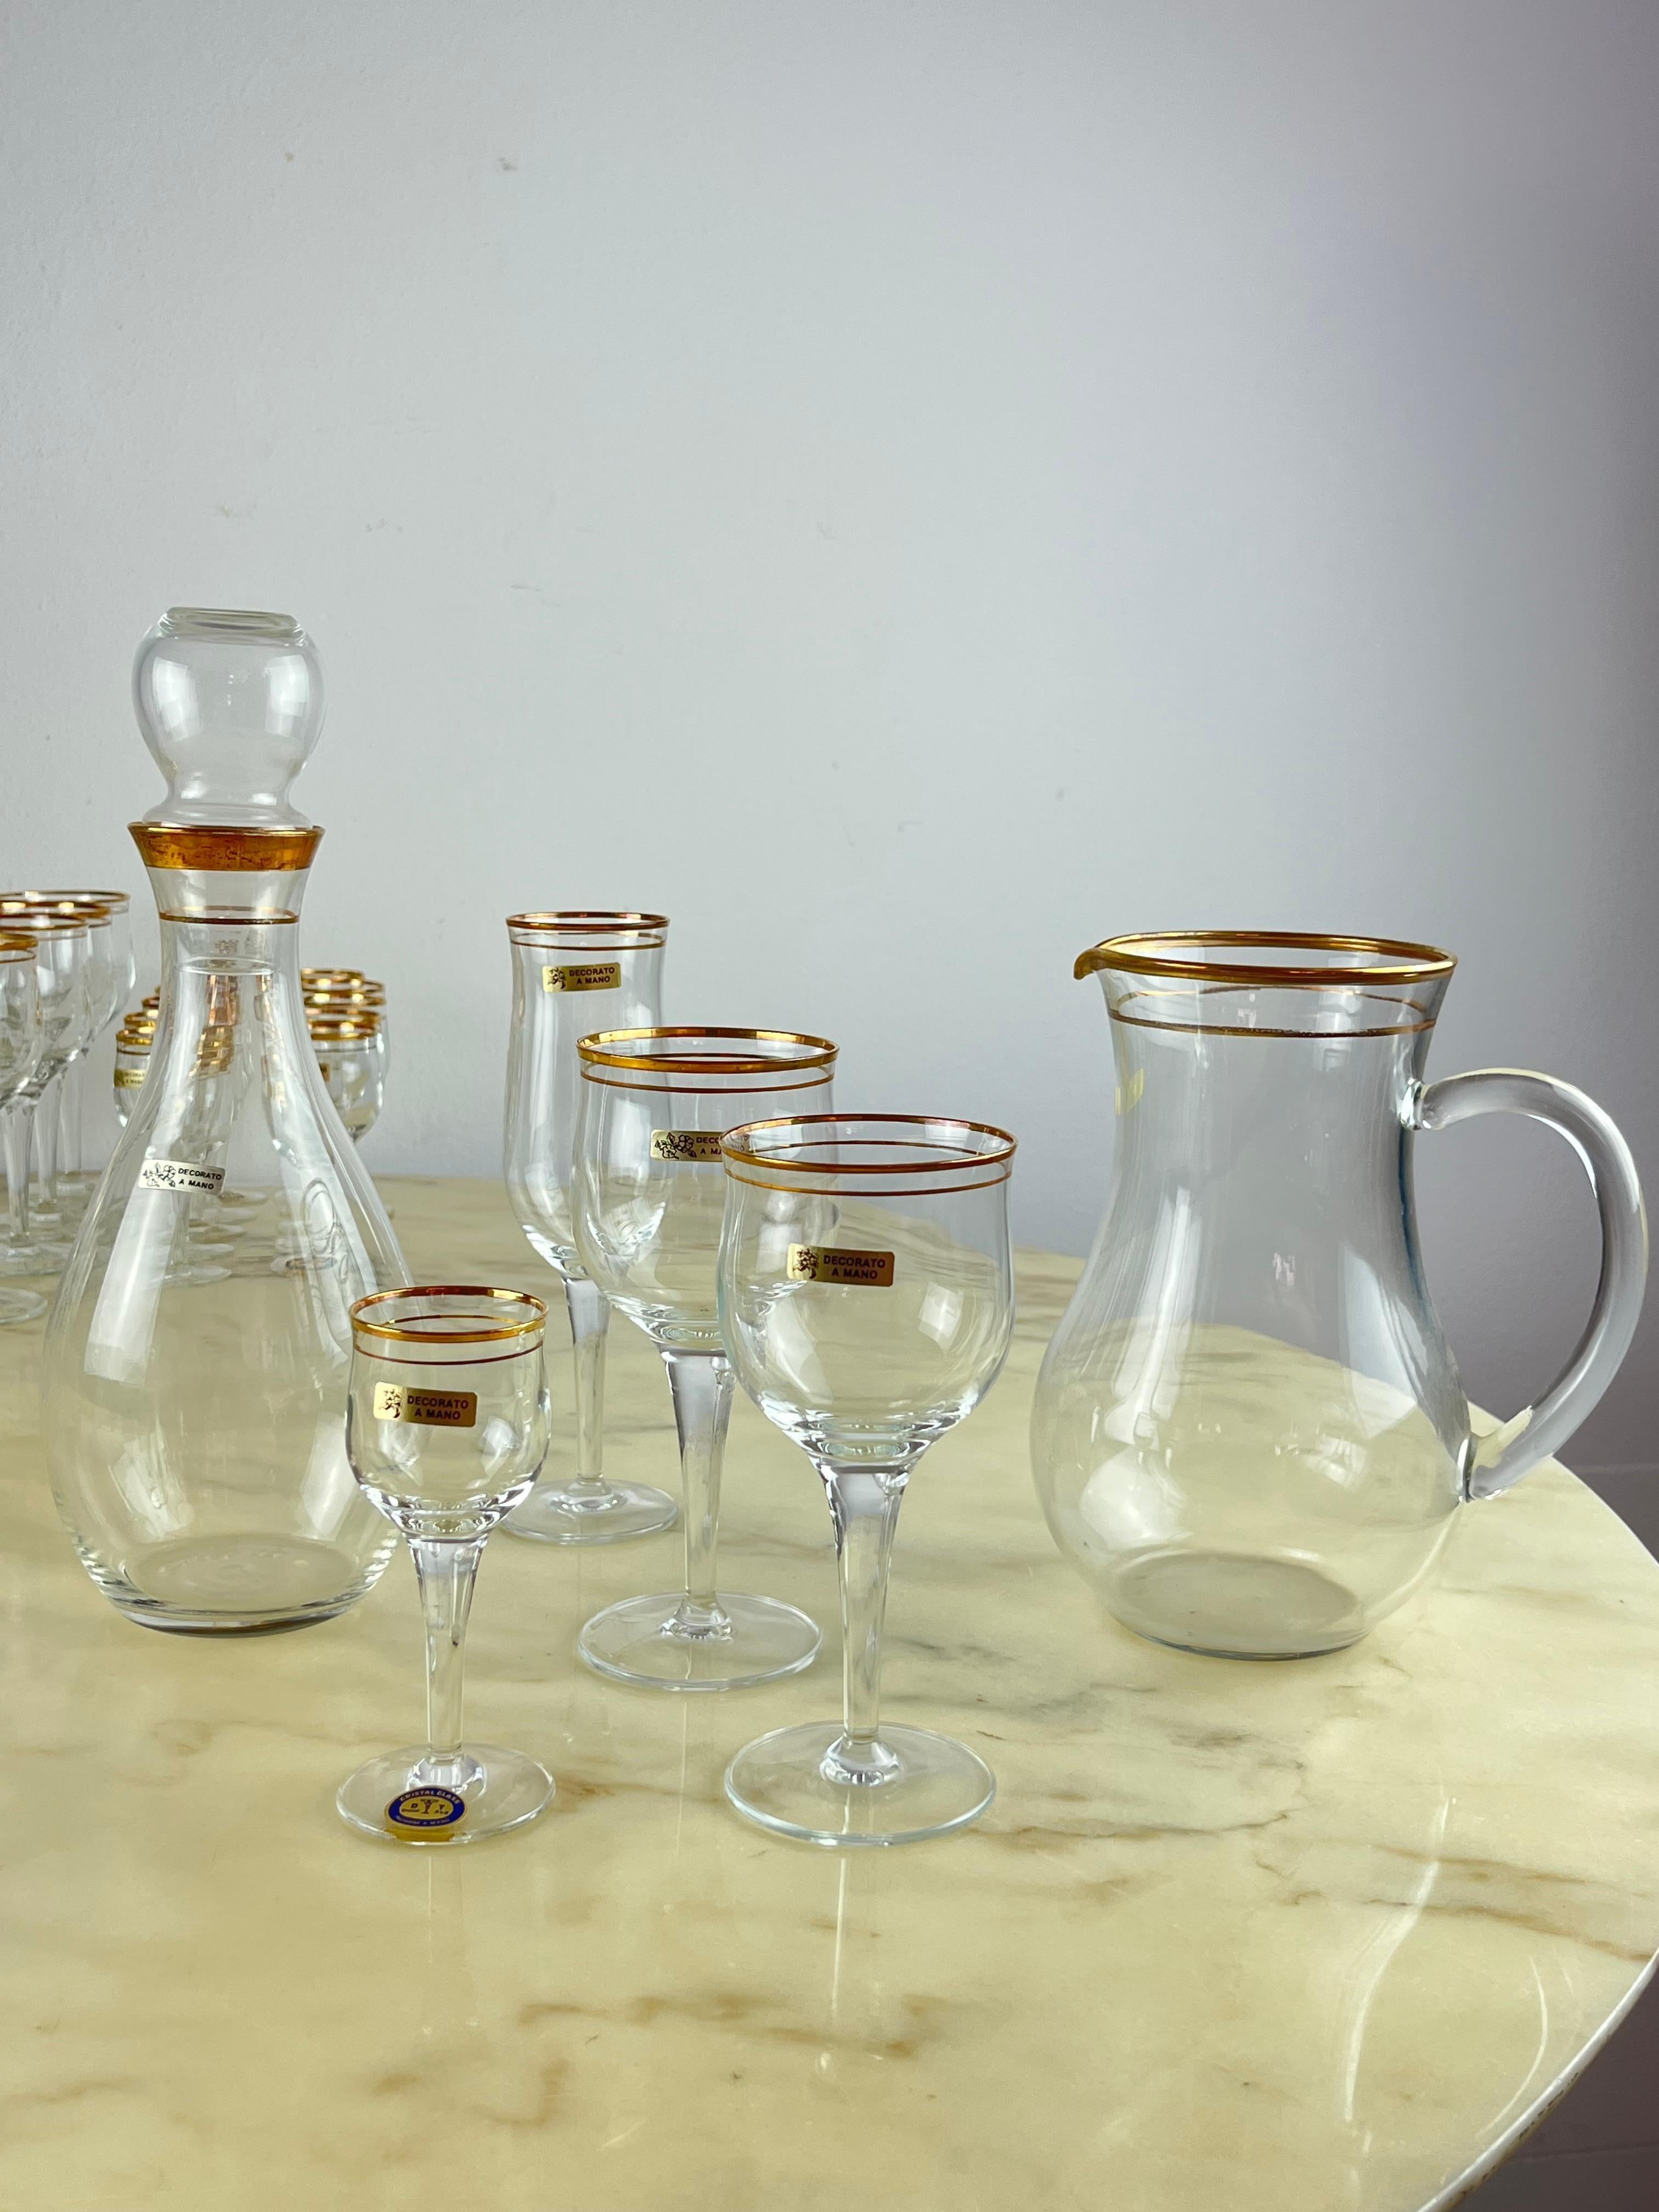 Hand-decorated crystal glass set, Italy, 1950s, 48 ​​pieces
Found in a noble apartment, it is made up of 12 water glasses (17 cm high x c, 7 diameter), 12 wine glasses (16 cm high x 7 cm diameter), 11 flutes (20 cm high x 5 cm diameter), 11 amaro